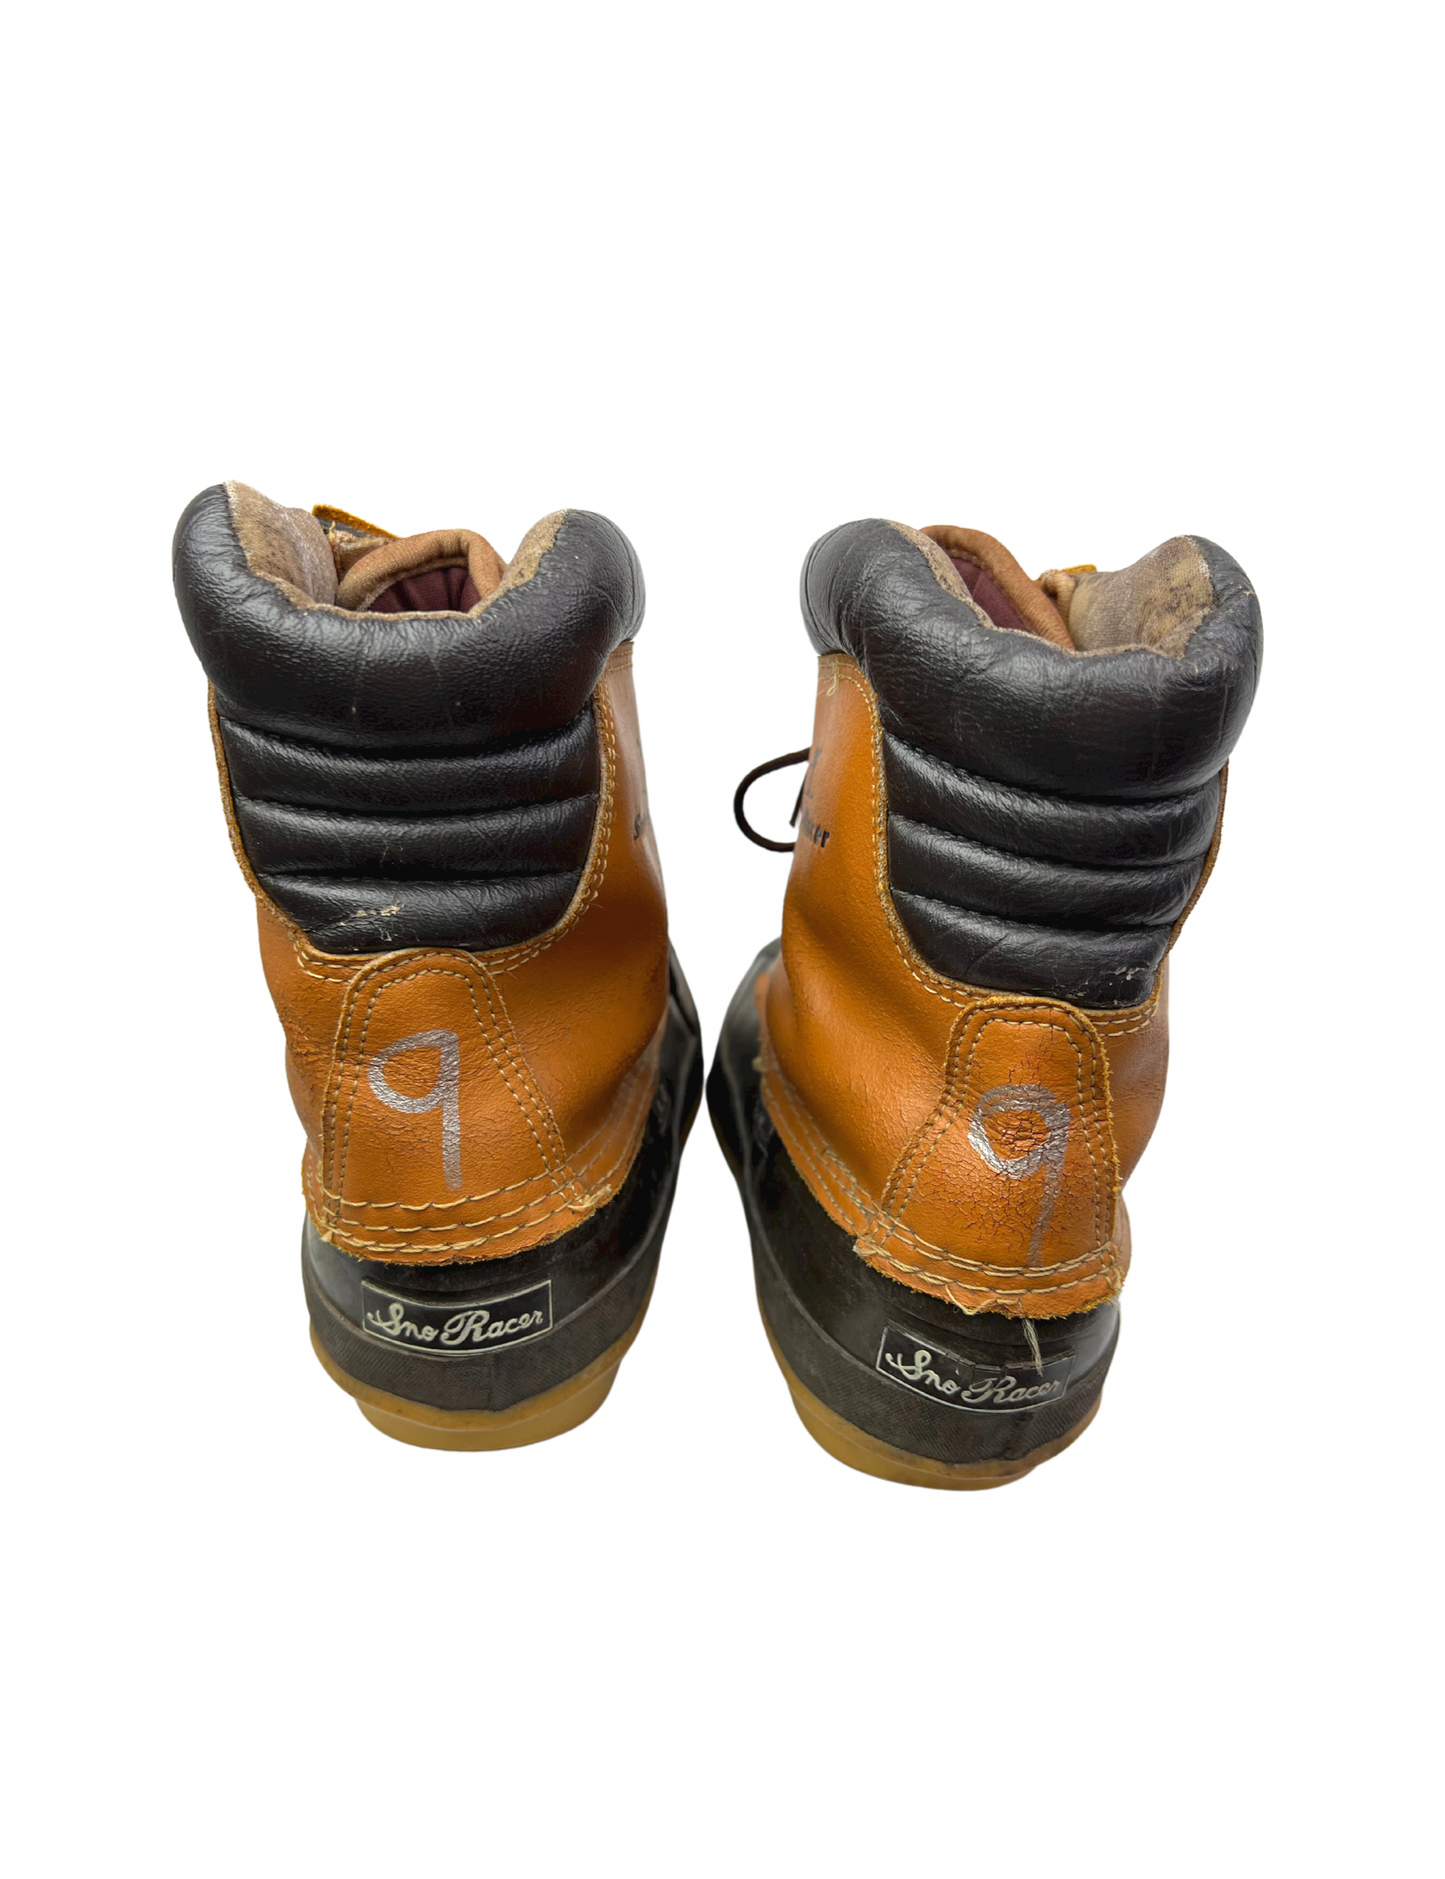 80’s Thinsulate Sno-Racer Leather Duck Boots Size 9